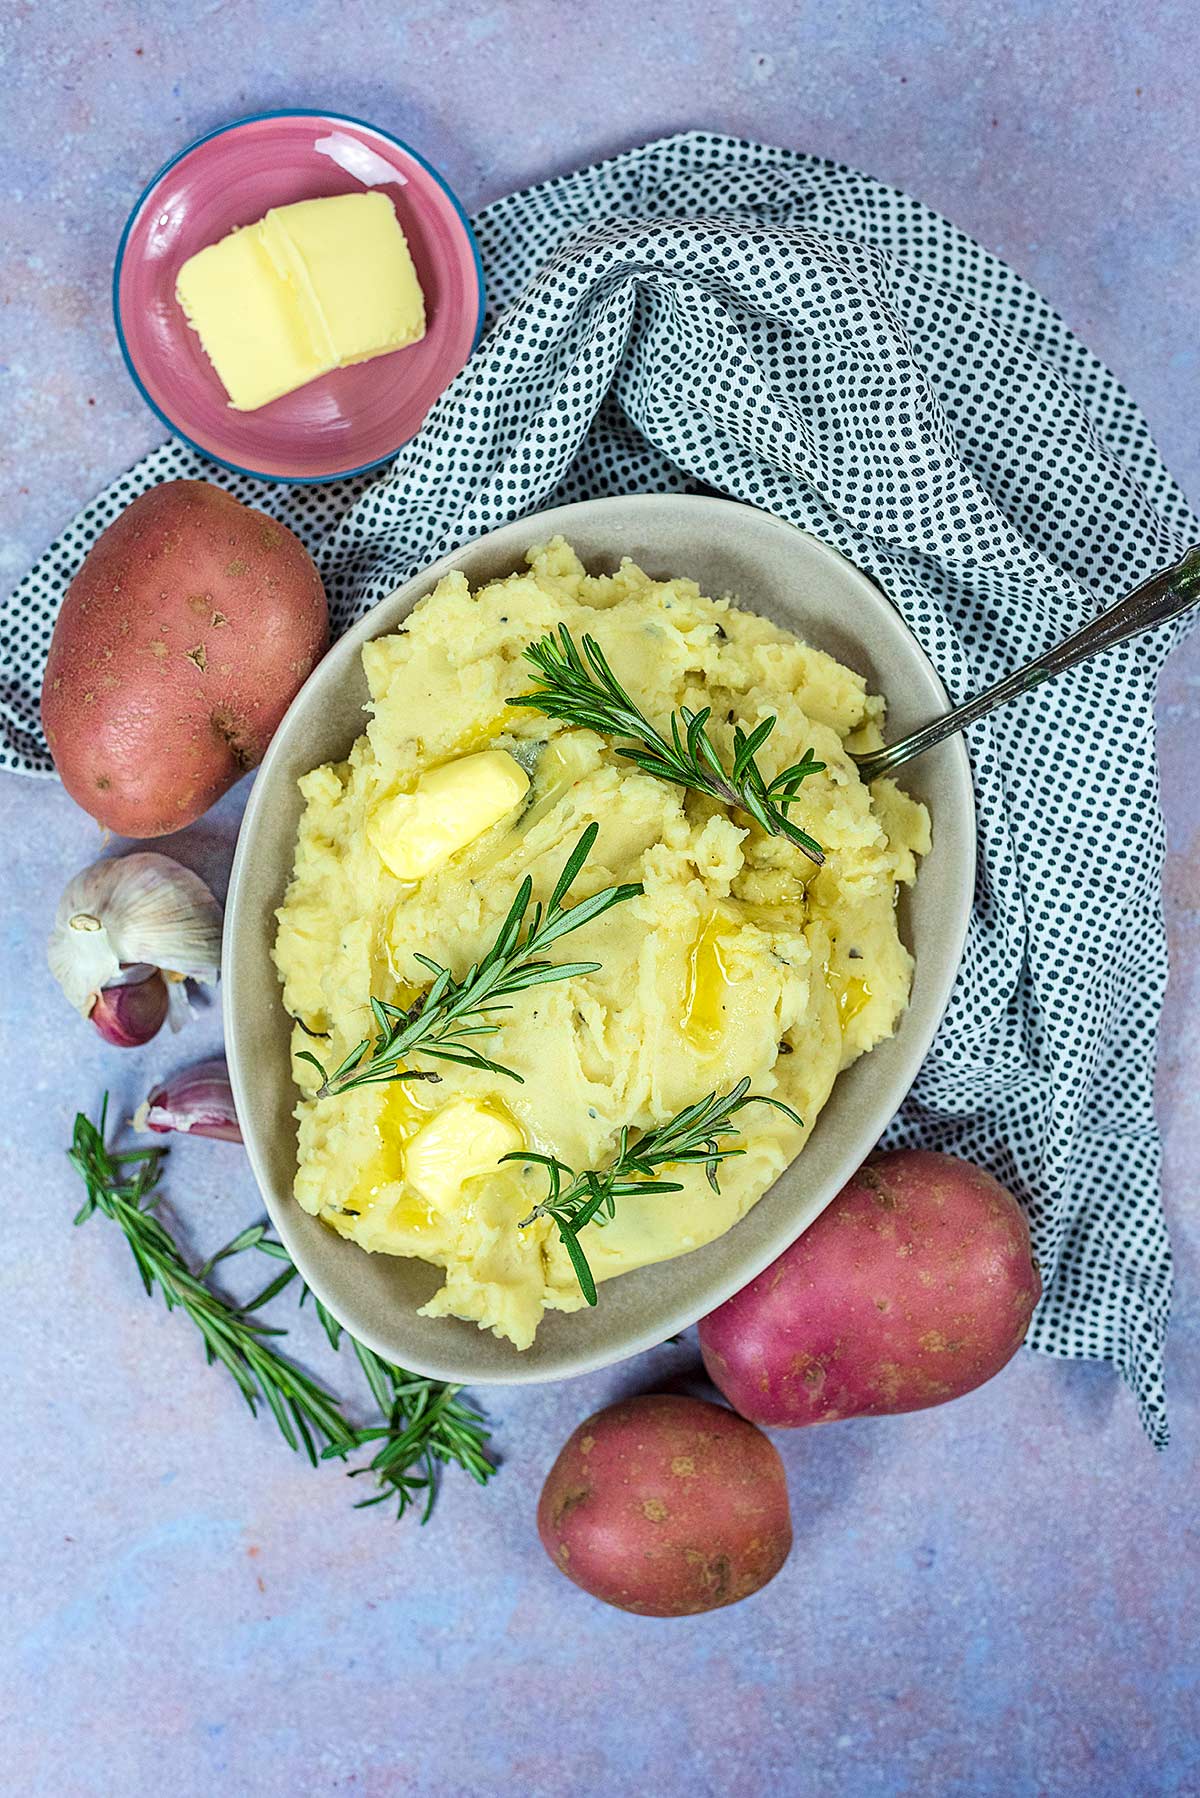 A bowl of slow cooker mashed potato next to some whole potatoes.